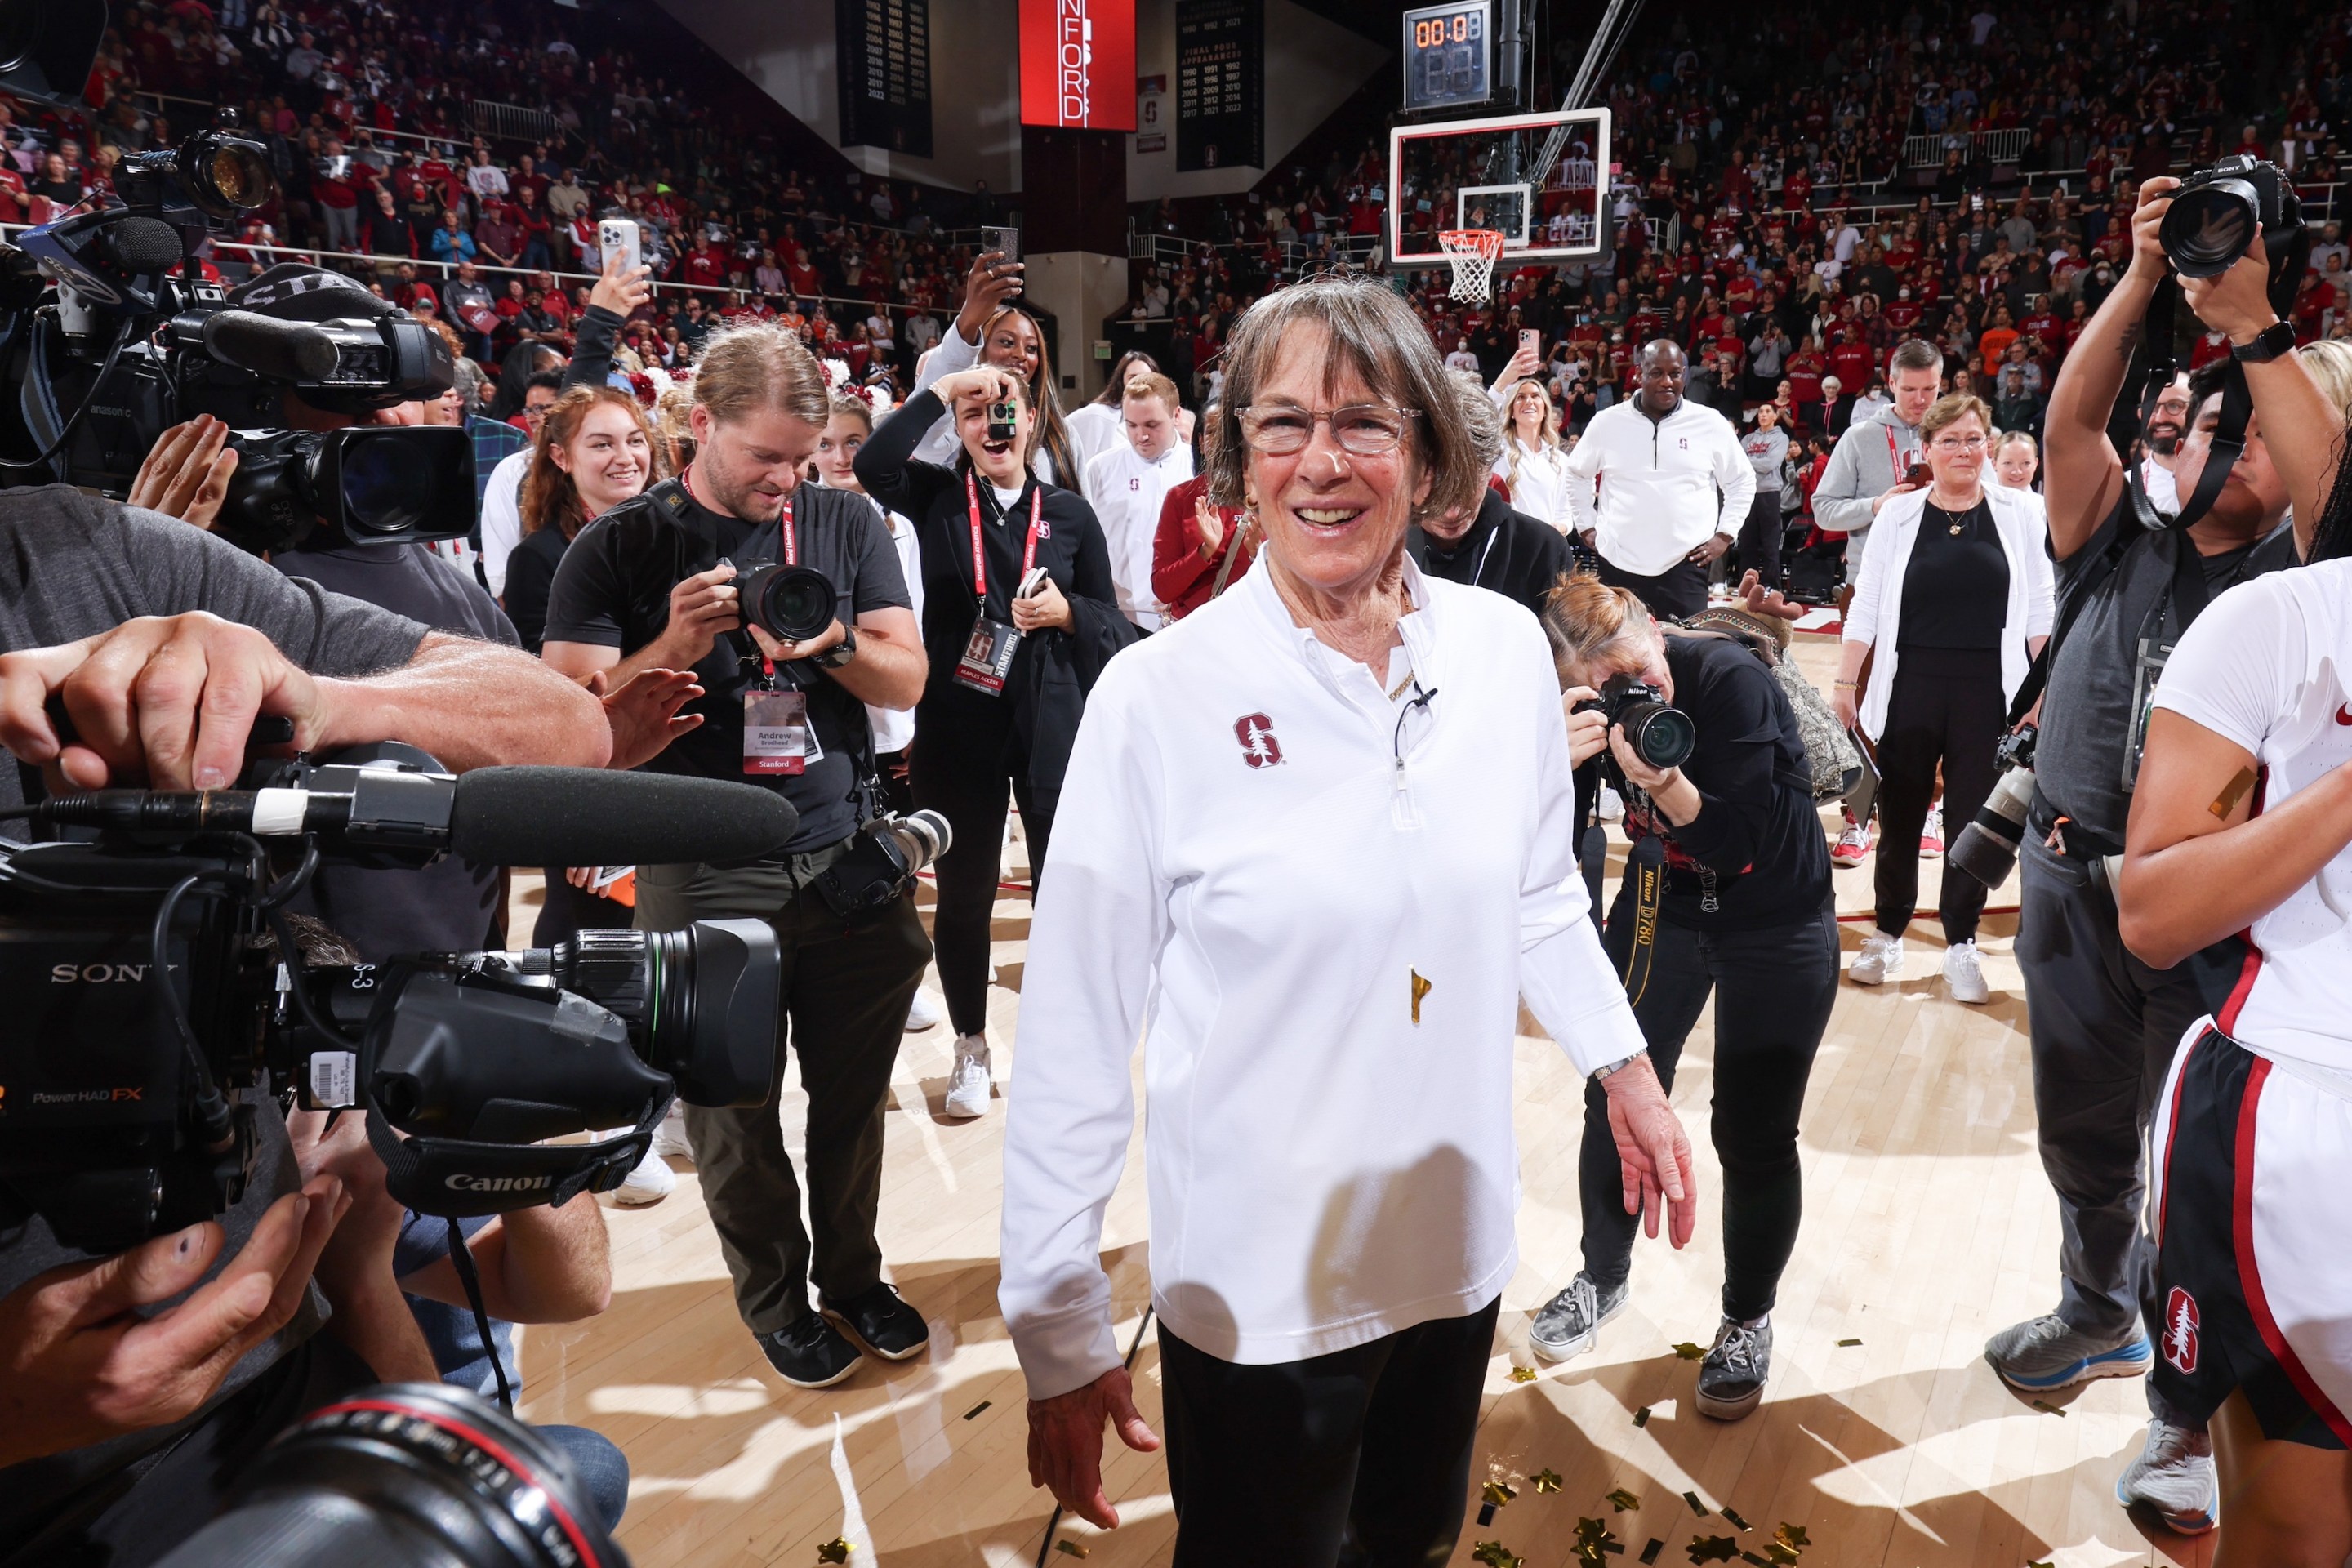 Stanford Cardinal head coach Tara VanDerveer celebrates her 1203rd career college coaching victory becoming the winningest coach in NCAA Division 1 basketball history.